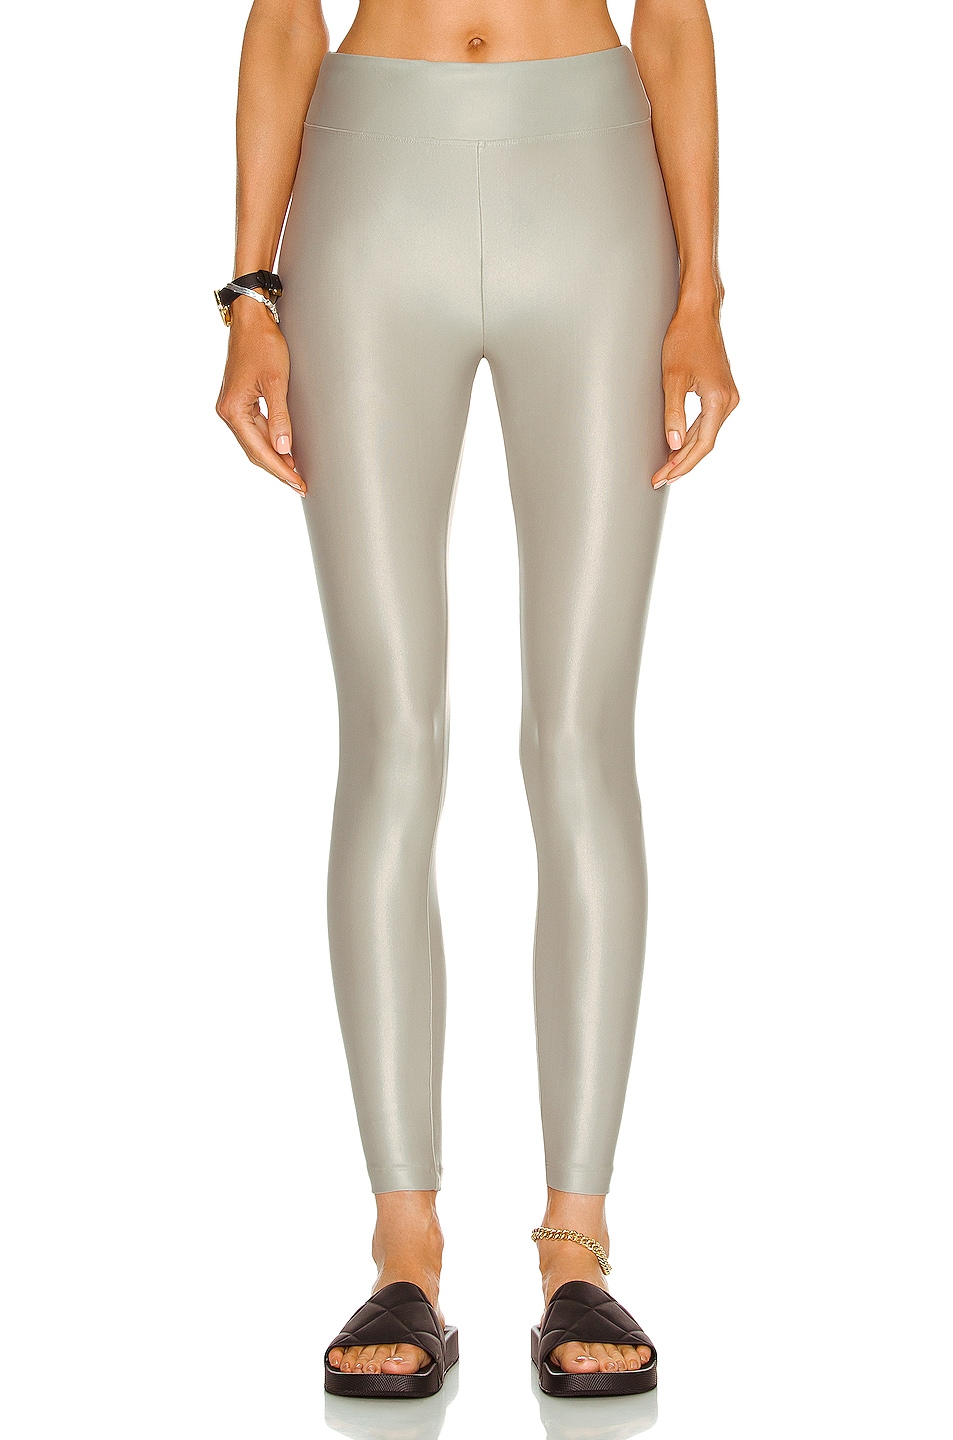 Image 1 of KORAL Lustrous Infinity High Rise Legging in Acropoles